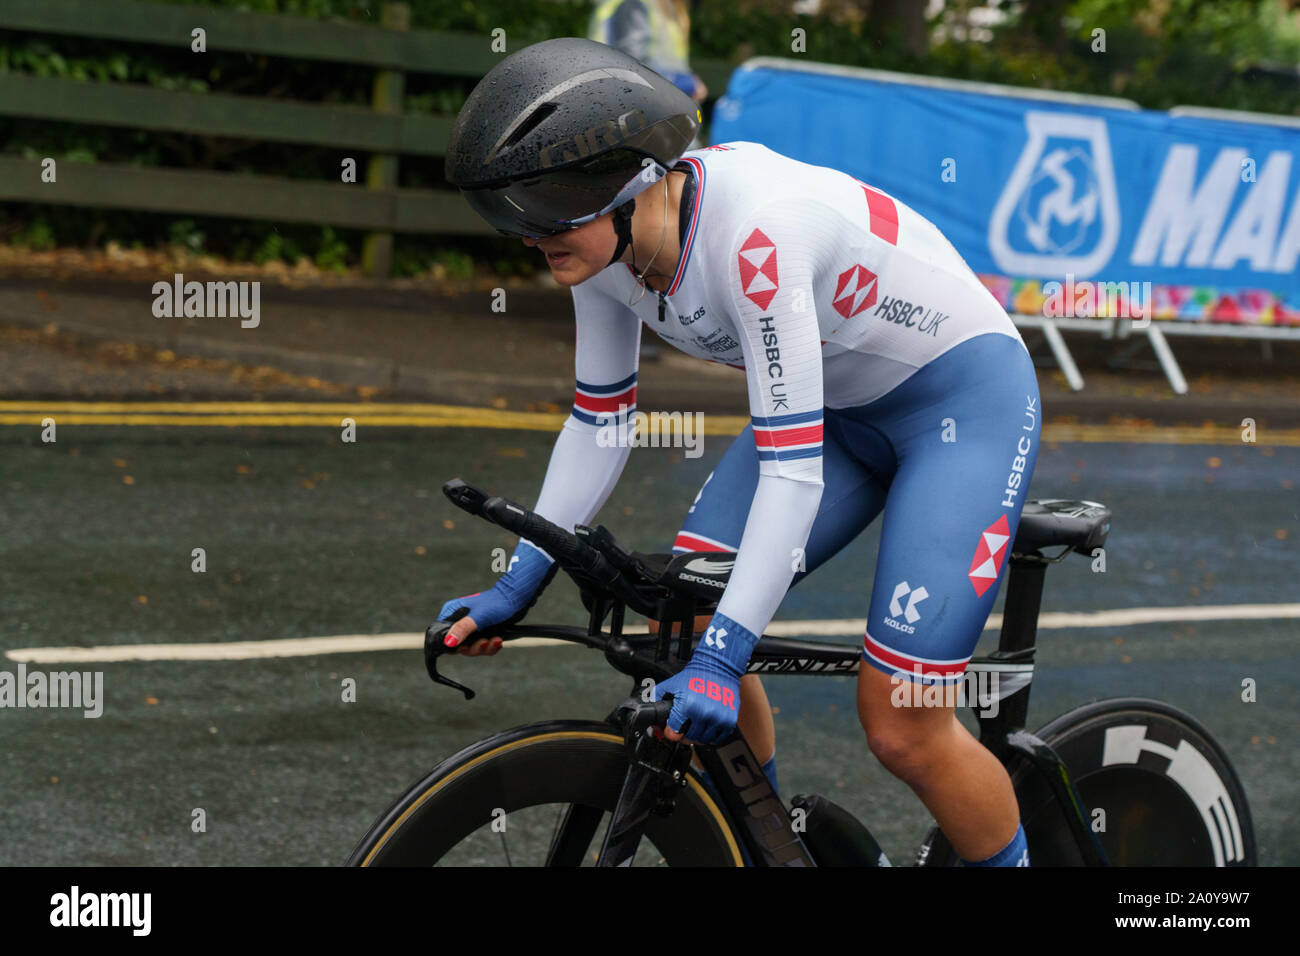 Joscelin Lowden competing in UCI 2019 Road World Championships, Team Time Trial Mixed Relay for Great Britain, Harrogate, North Yorkshire, England, UK. Stock Photo